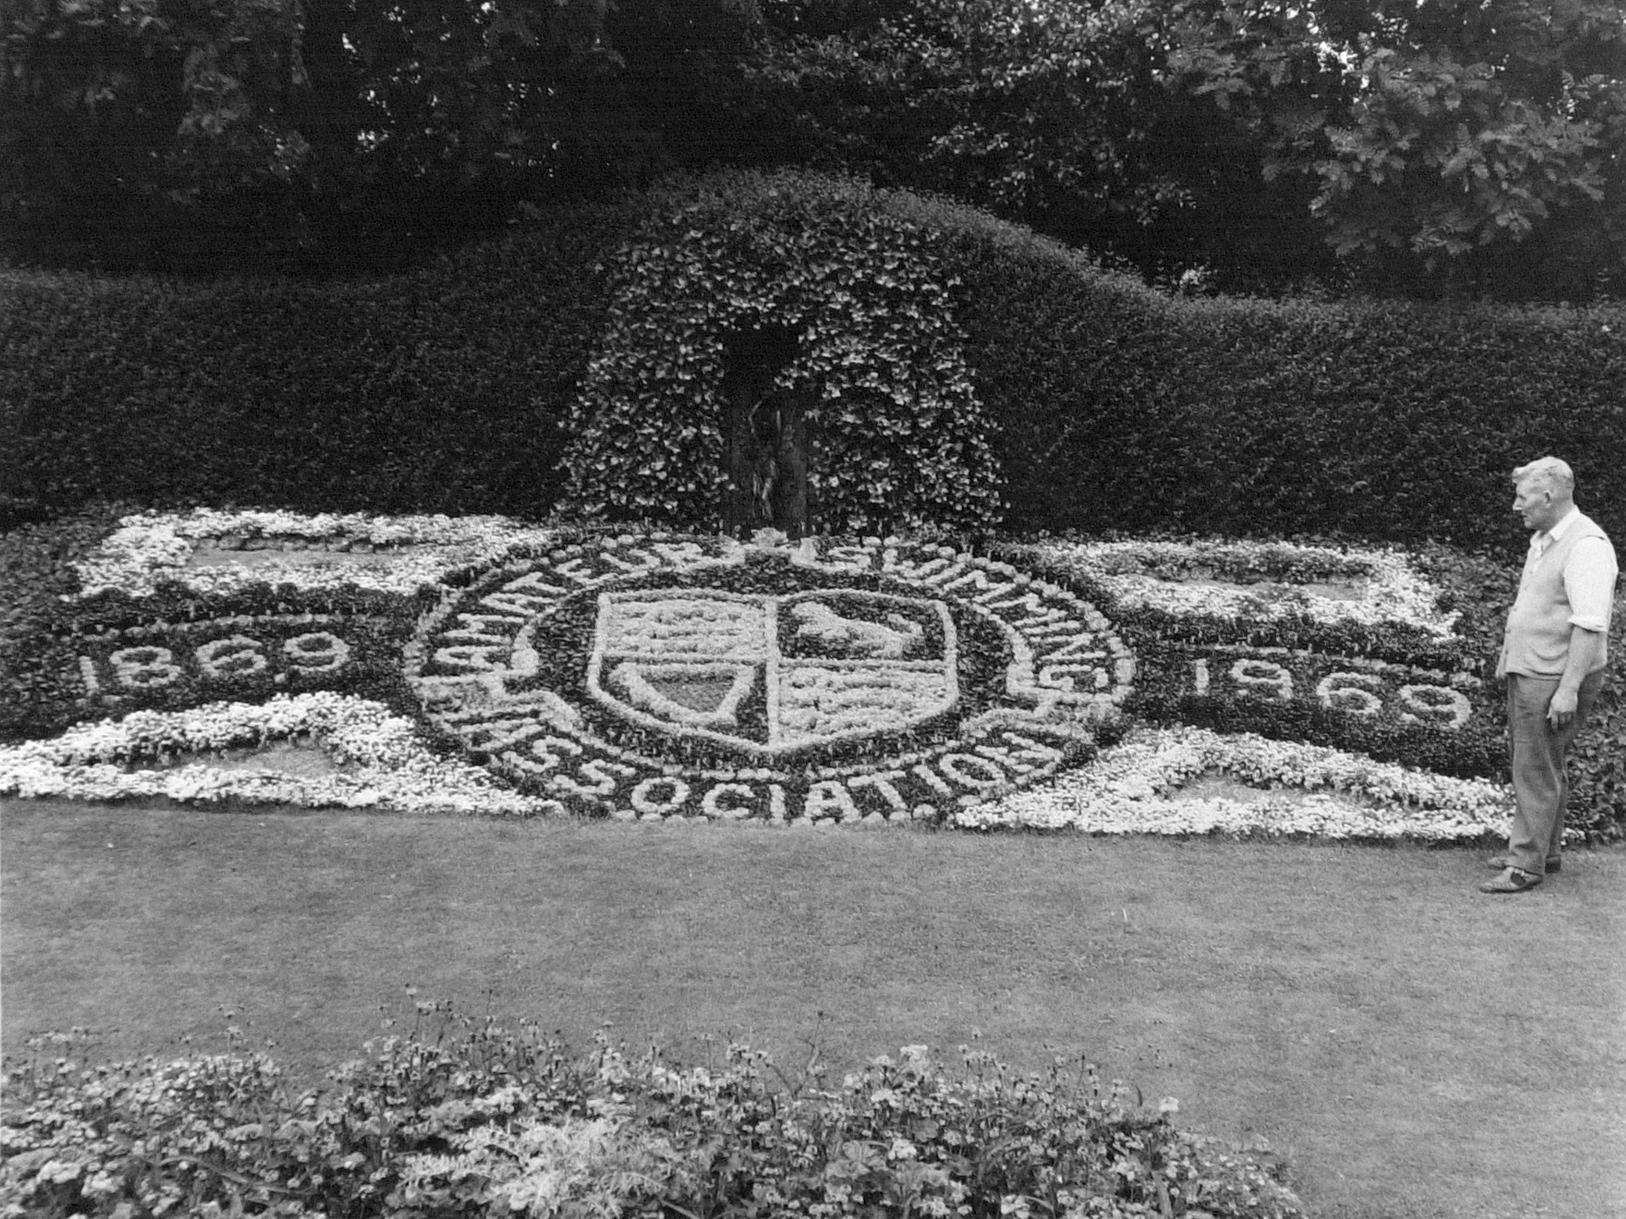 Louis Fett, head gardener at Armley Park, with a floral design he made to commemorate the centenary of the Amateur Swimming Association.